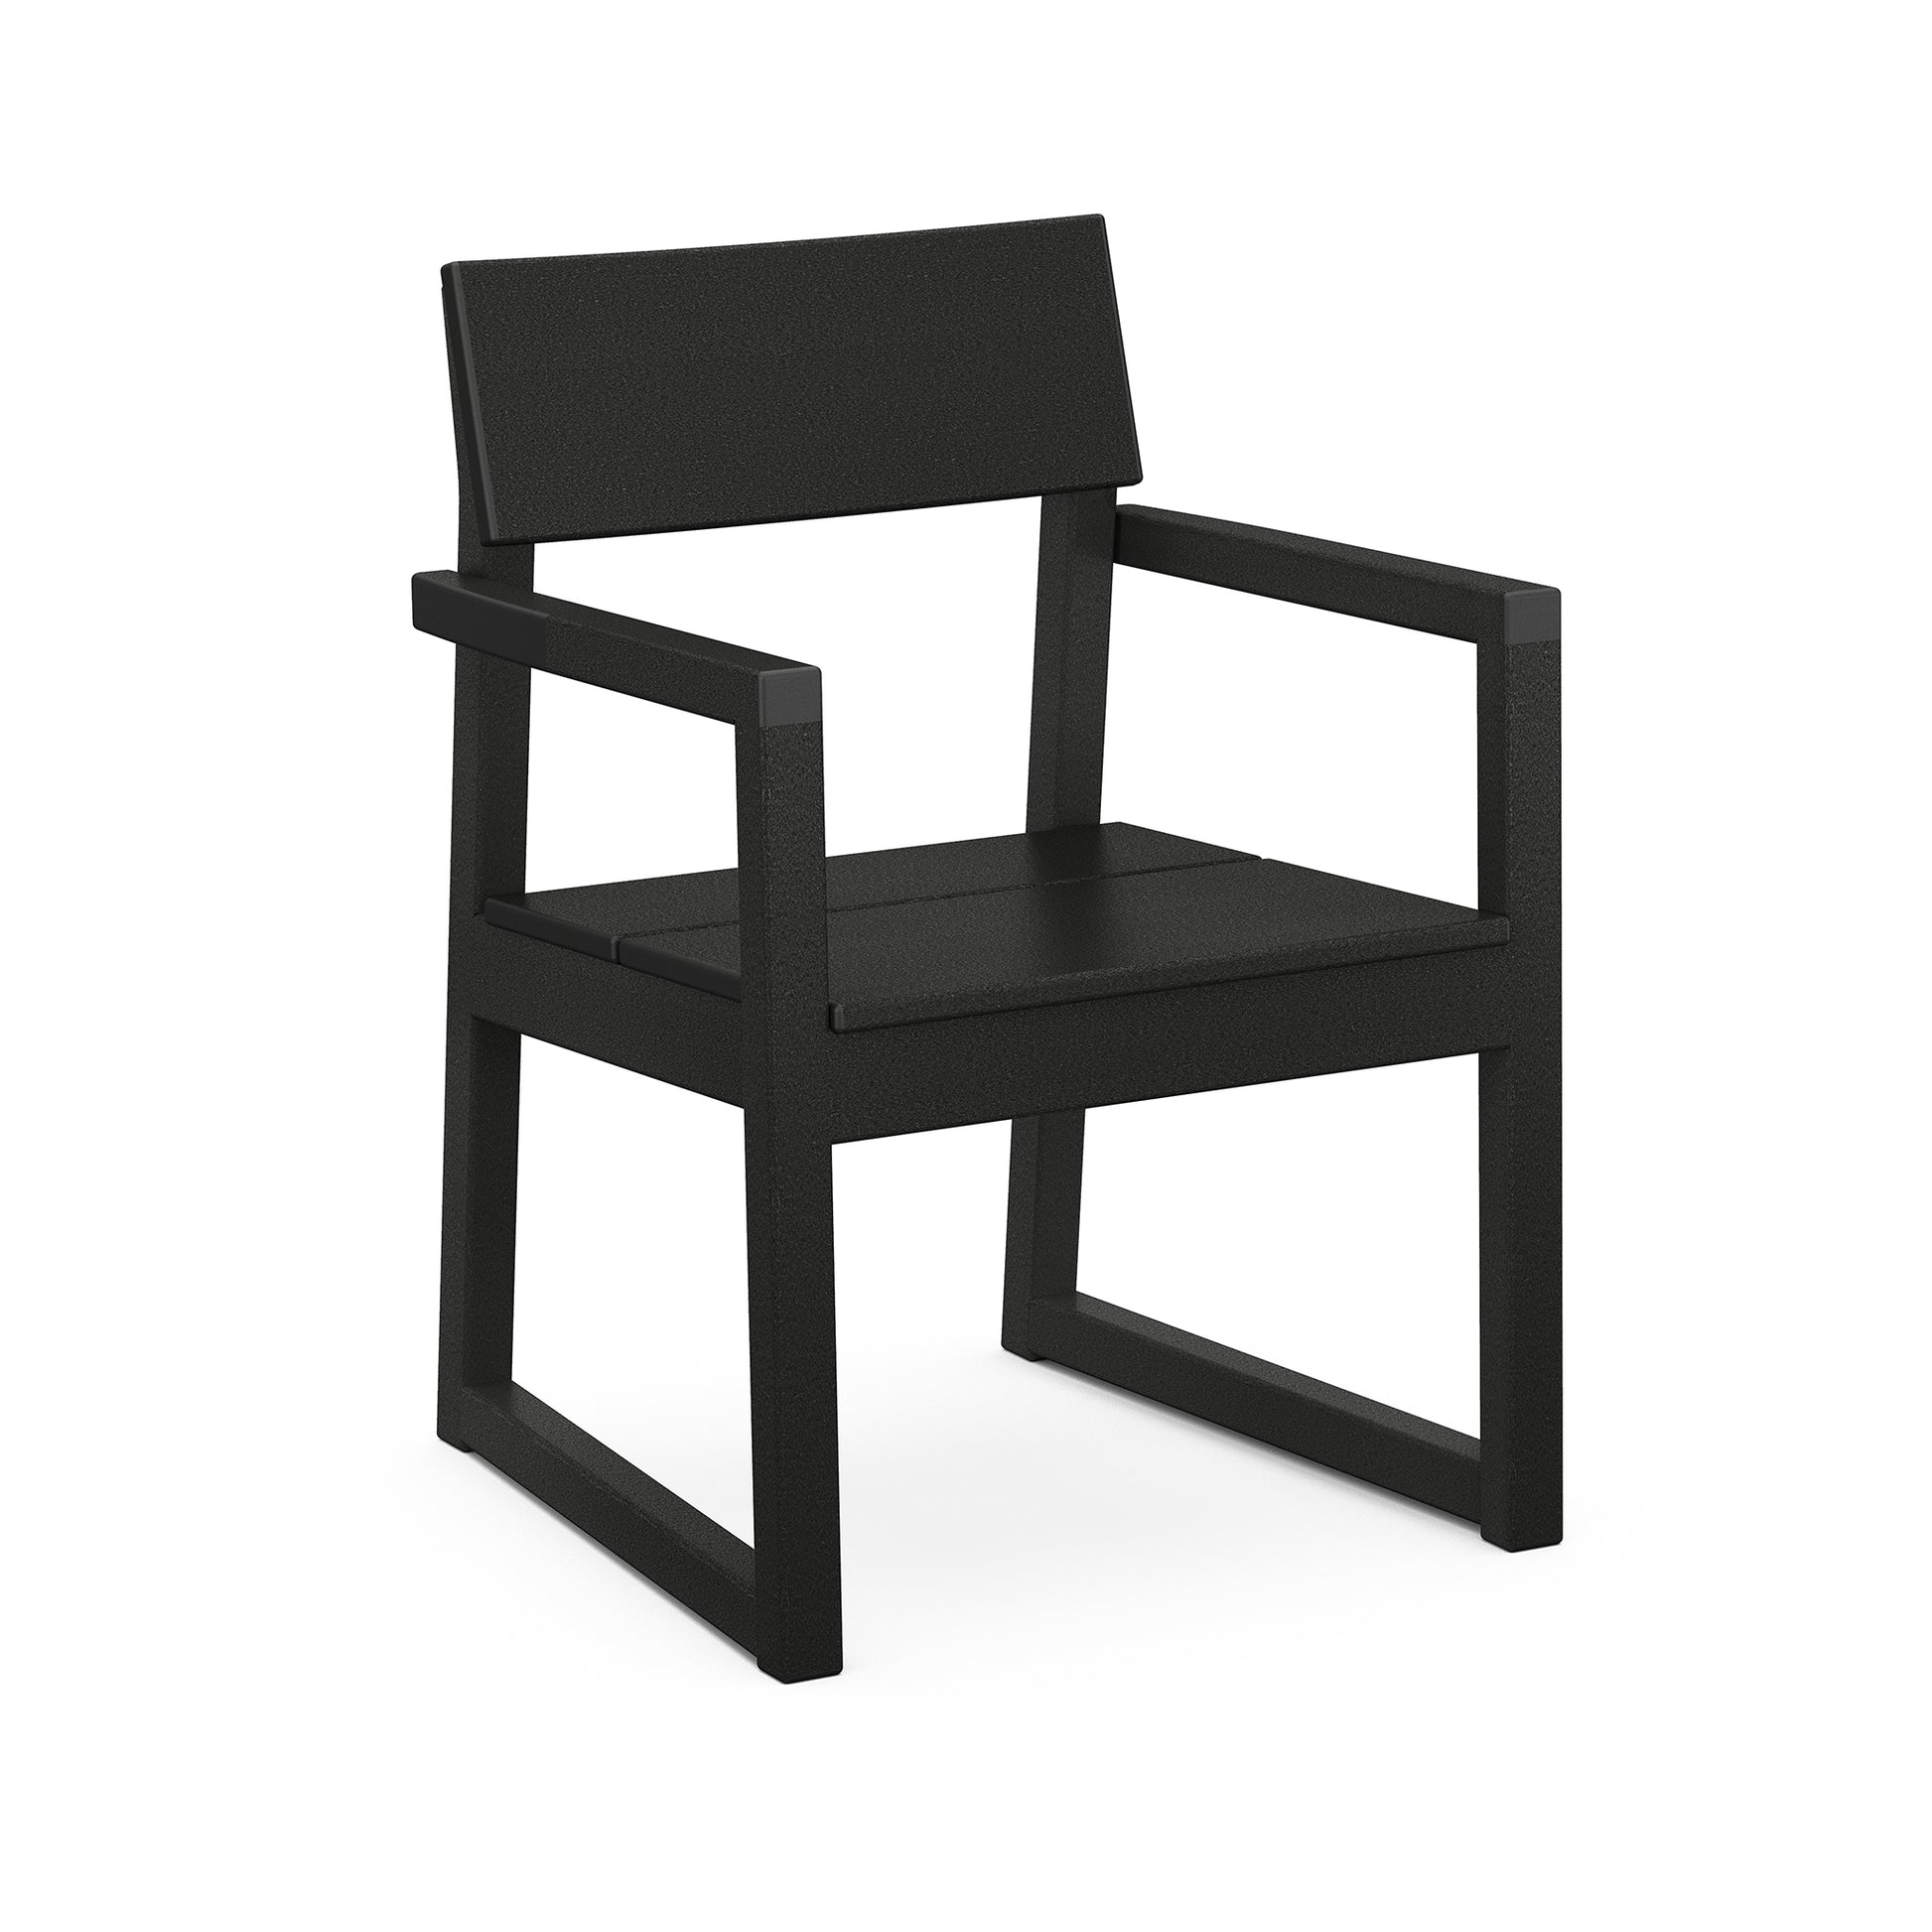 A modern, matte black POLYWOOD EDGE Dining Arm Chair with a minimalist design, featuring a square seat and backrest, and sturdy frame that’s slightly angled for support using marine-grade hardware.